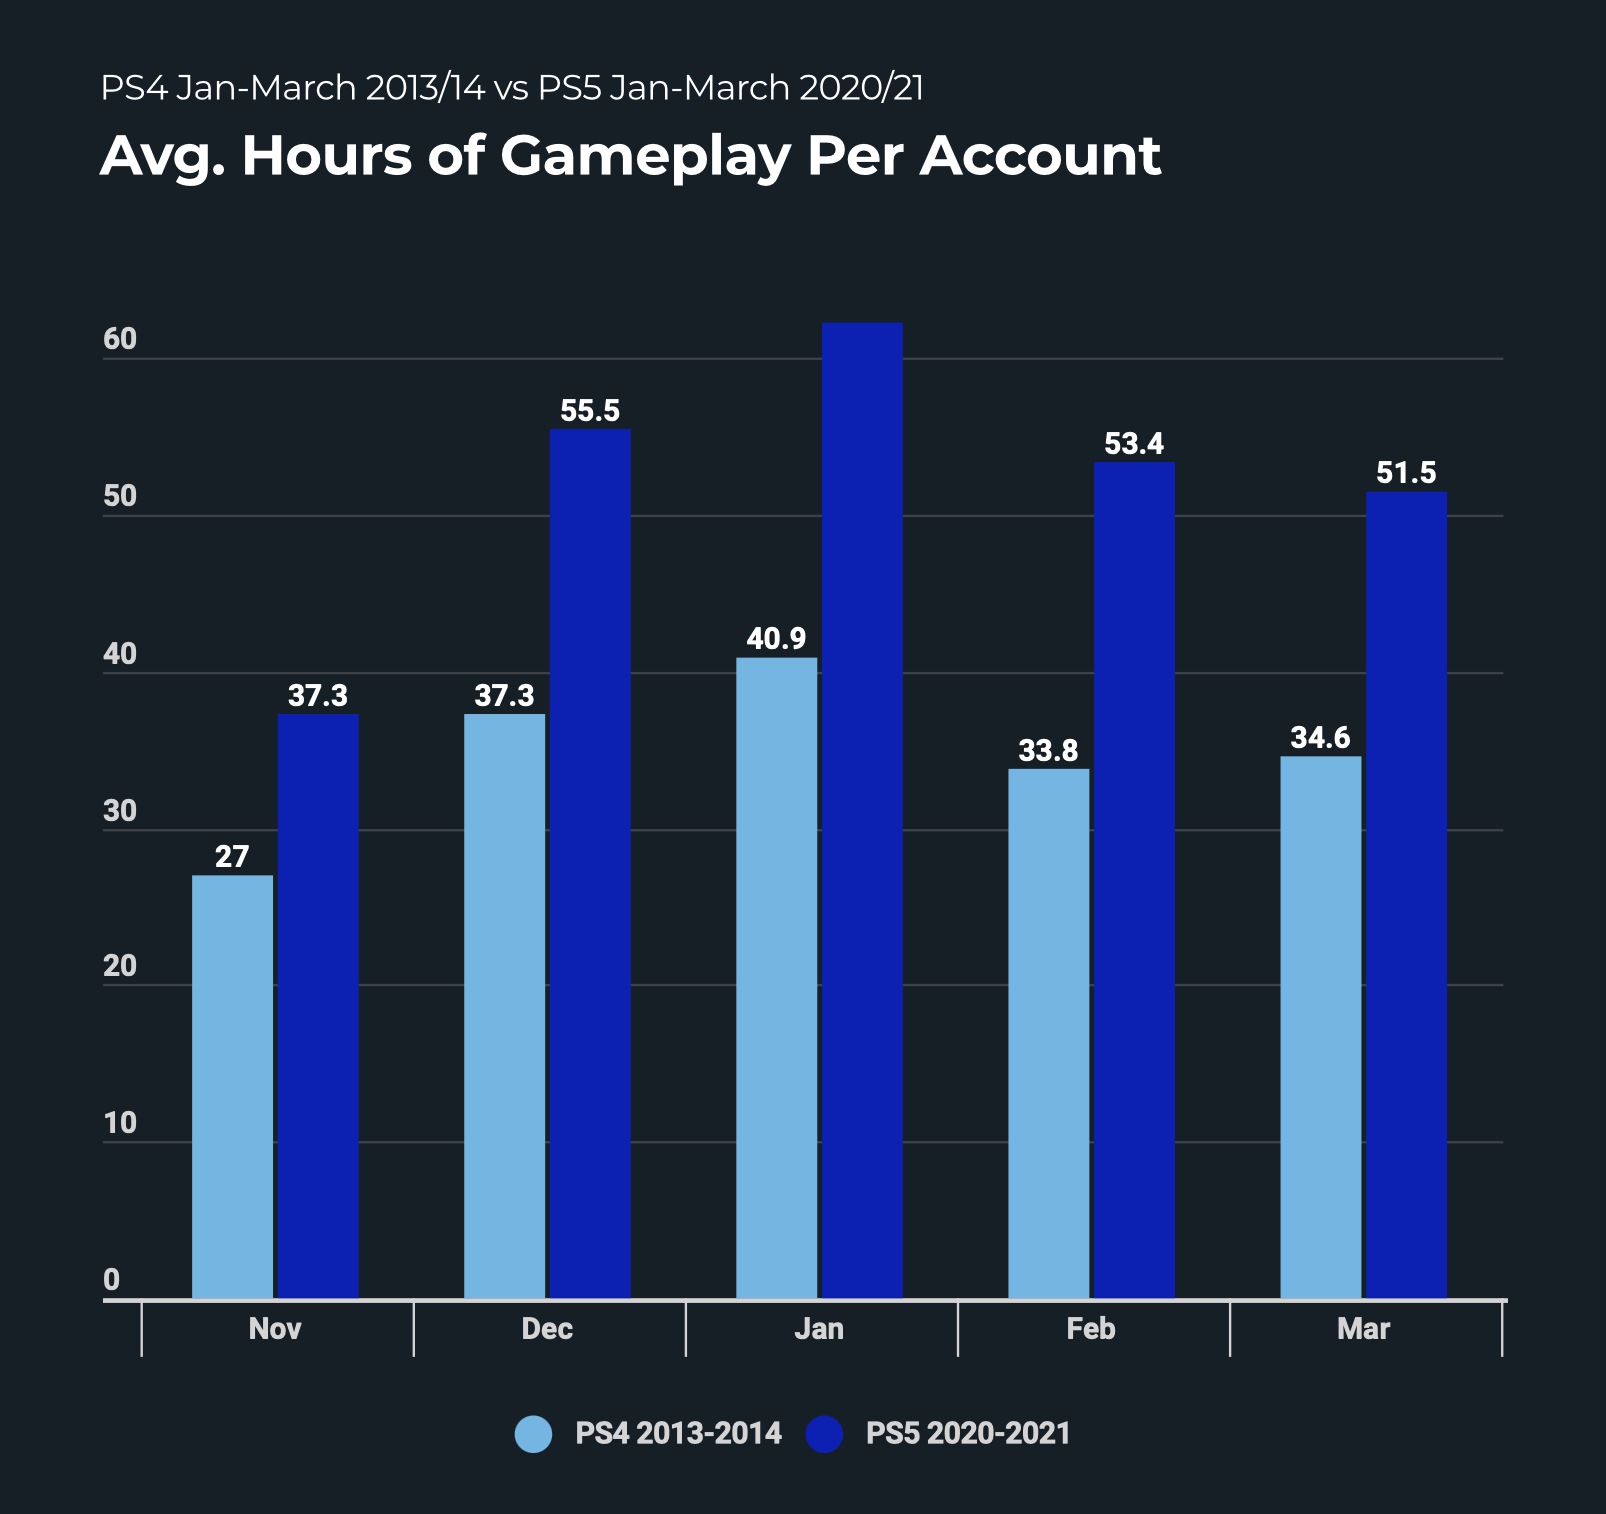 PlayStation 5 Averaged 51.5 Hours Of Gameplay In Its 5th Month – Almost 50% More Than PS4